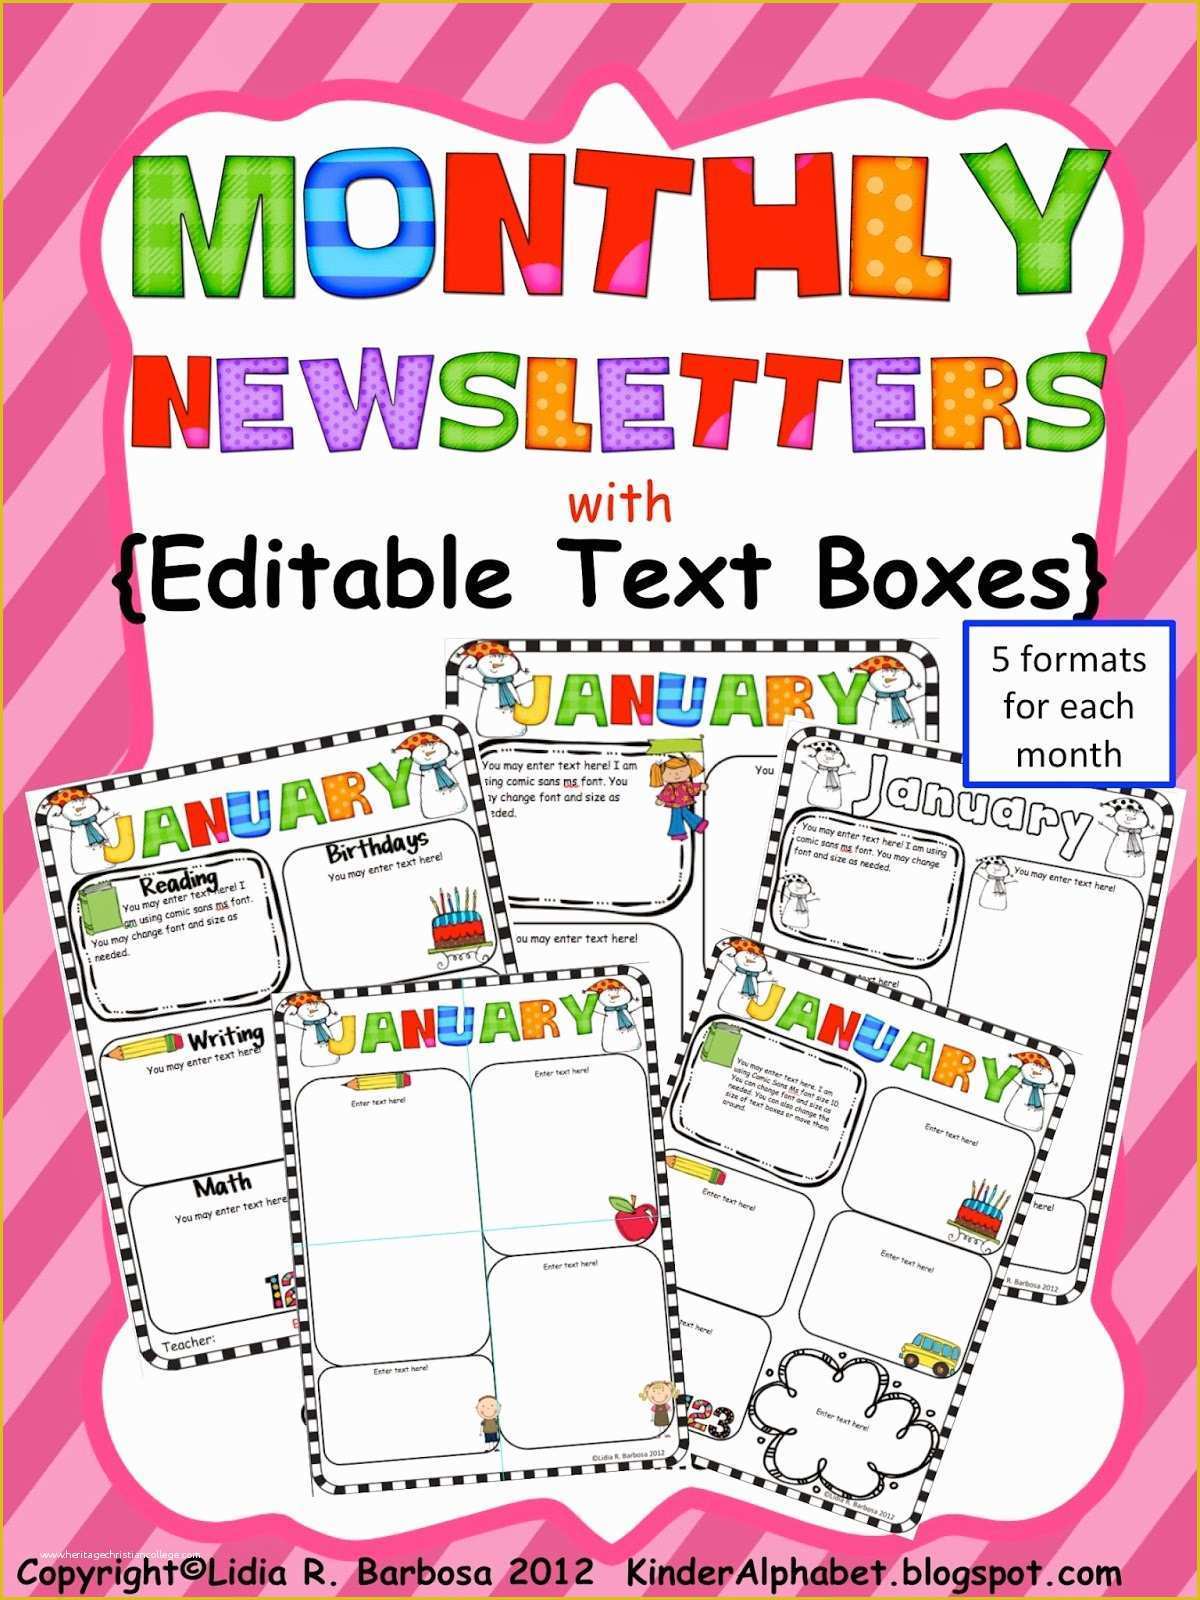 Free Newsletter Templates for Teachers Of Kinder Alphabet — Teacher Resources In English and Spanish